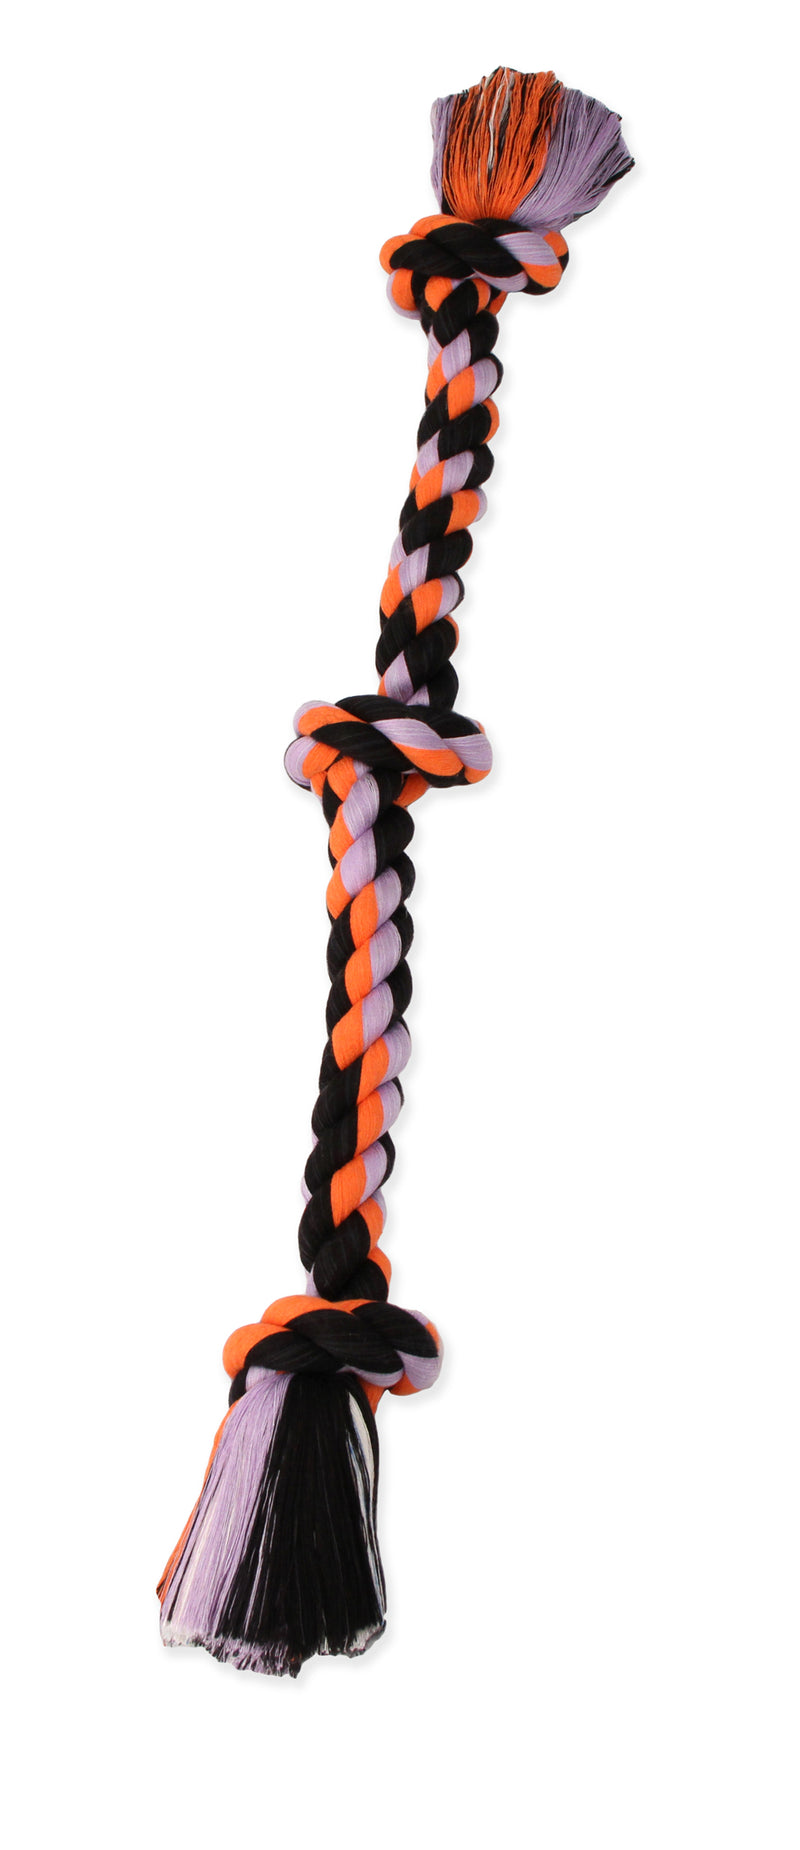 Mammoth Pet Lg 25-in Cotton-Poly Color 3 Knot Rope Tug Dog Toy